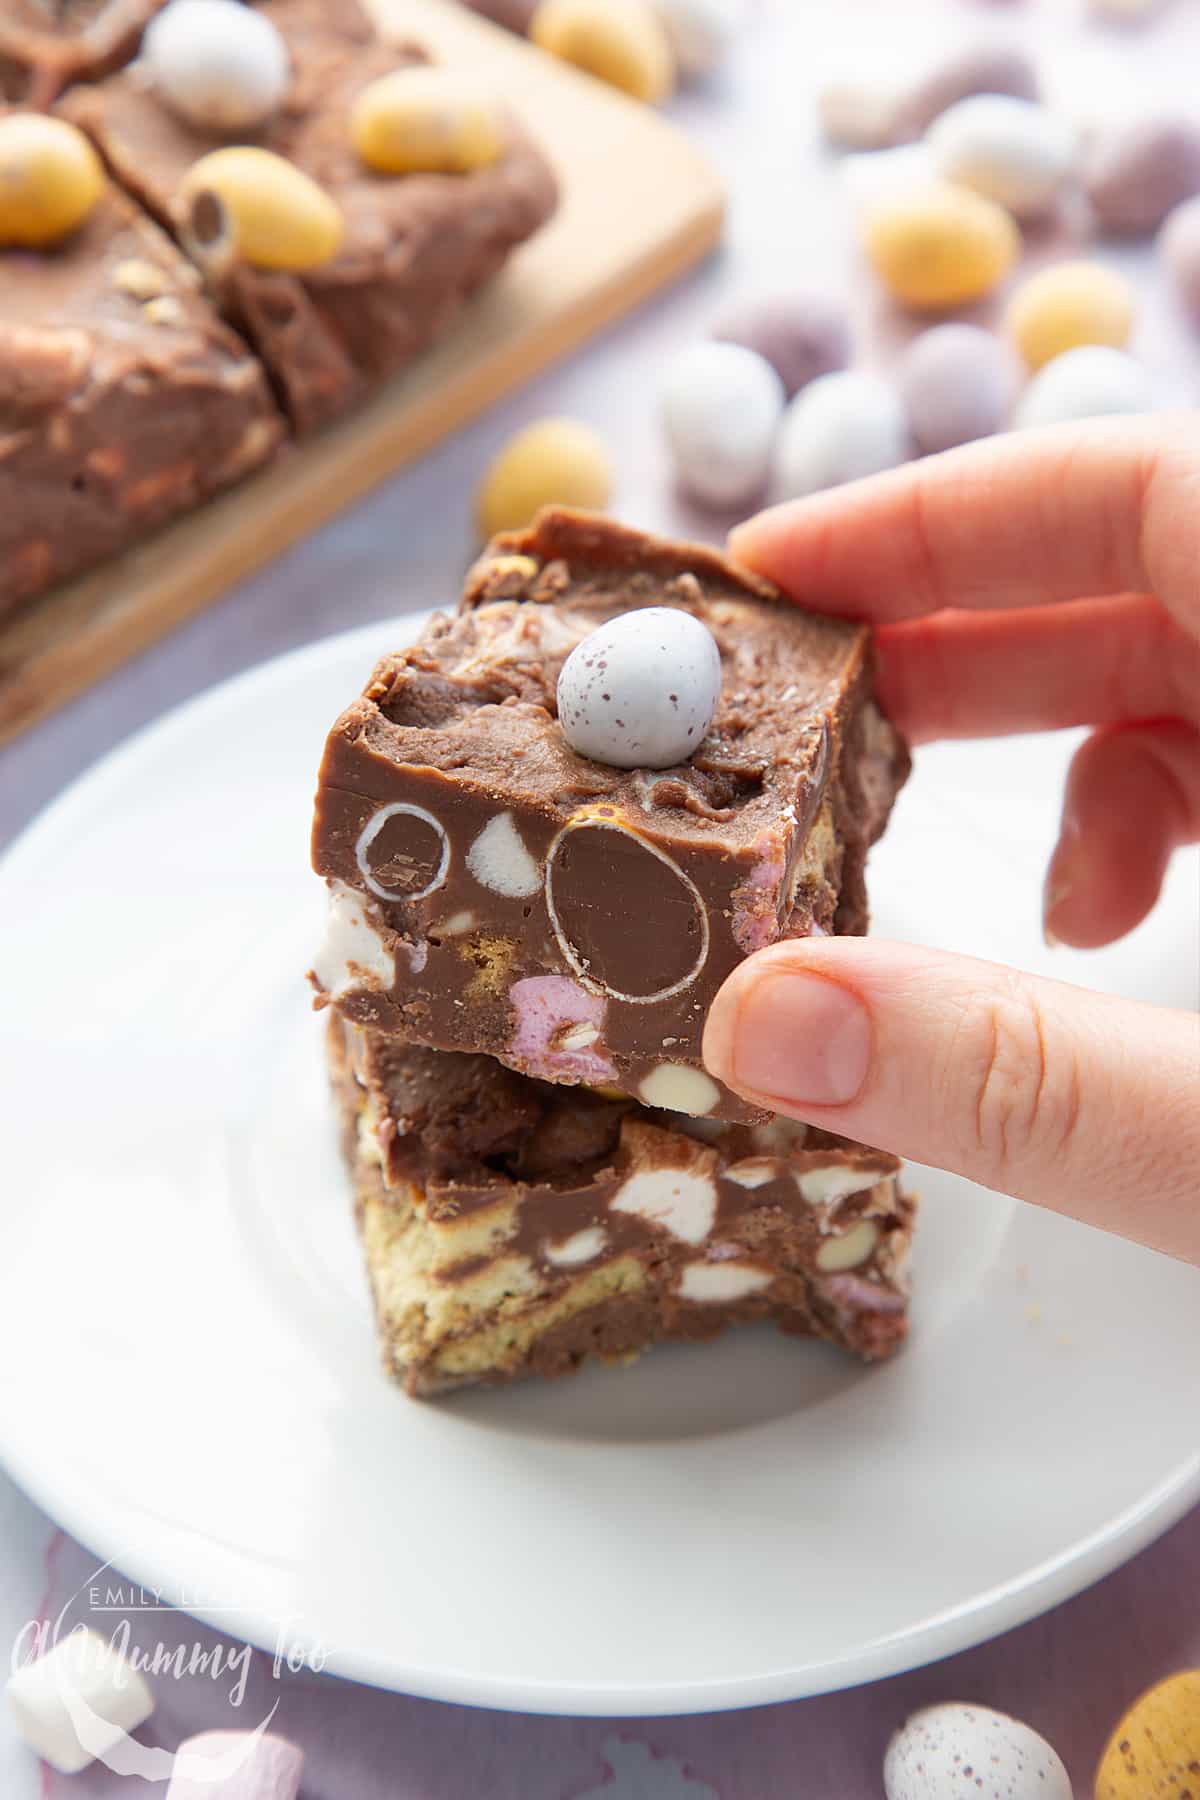 Two squares of Mini Egg rocky road stacked on a small white plate. A hand reaches to take the top piece.